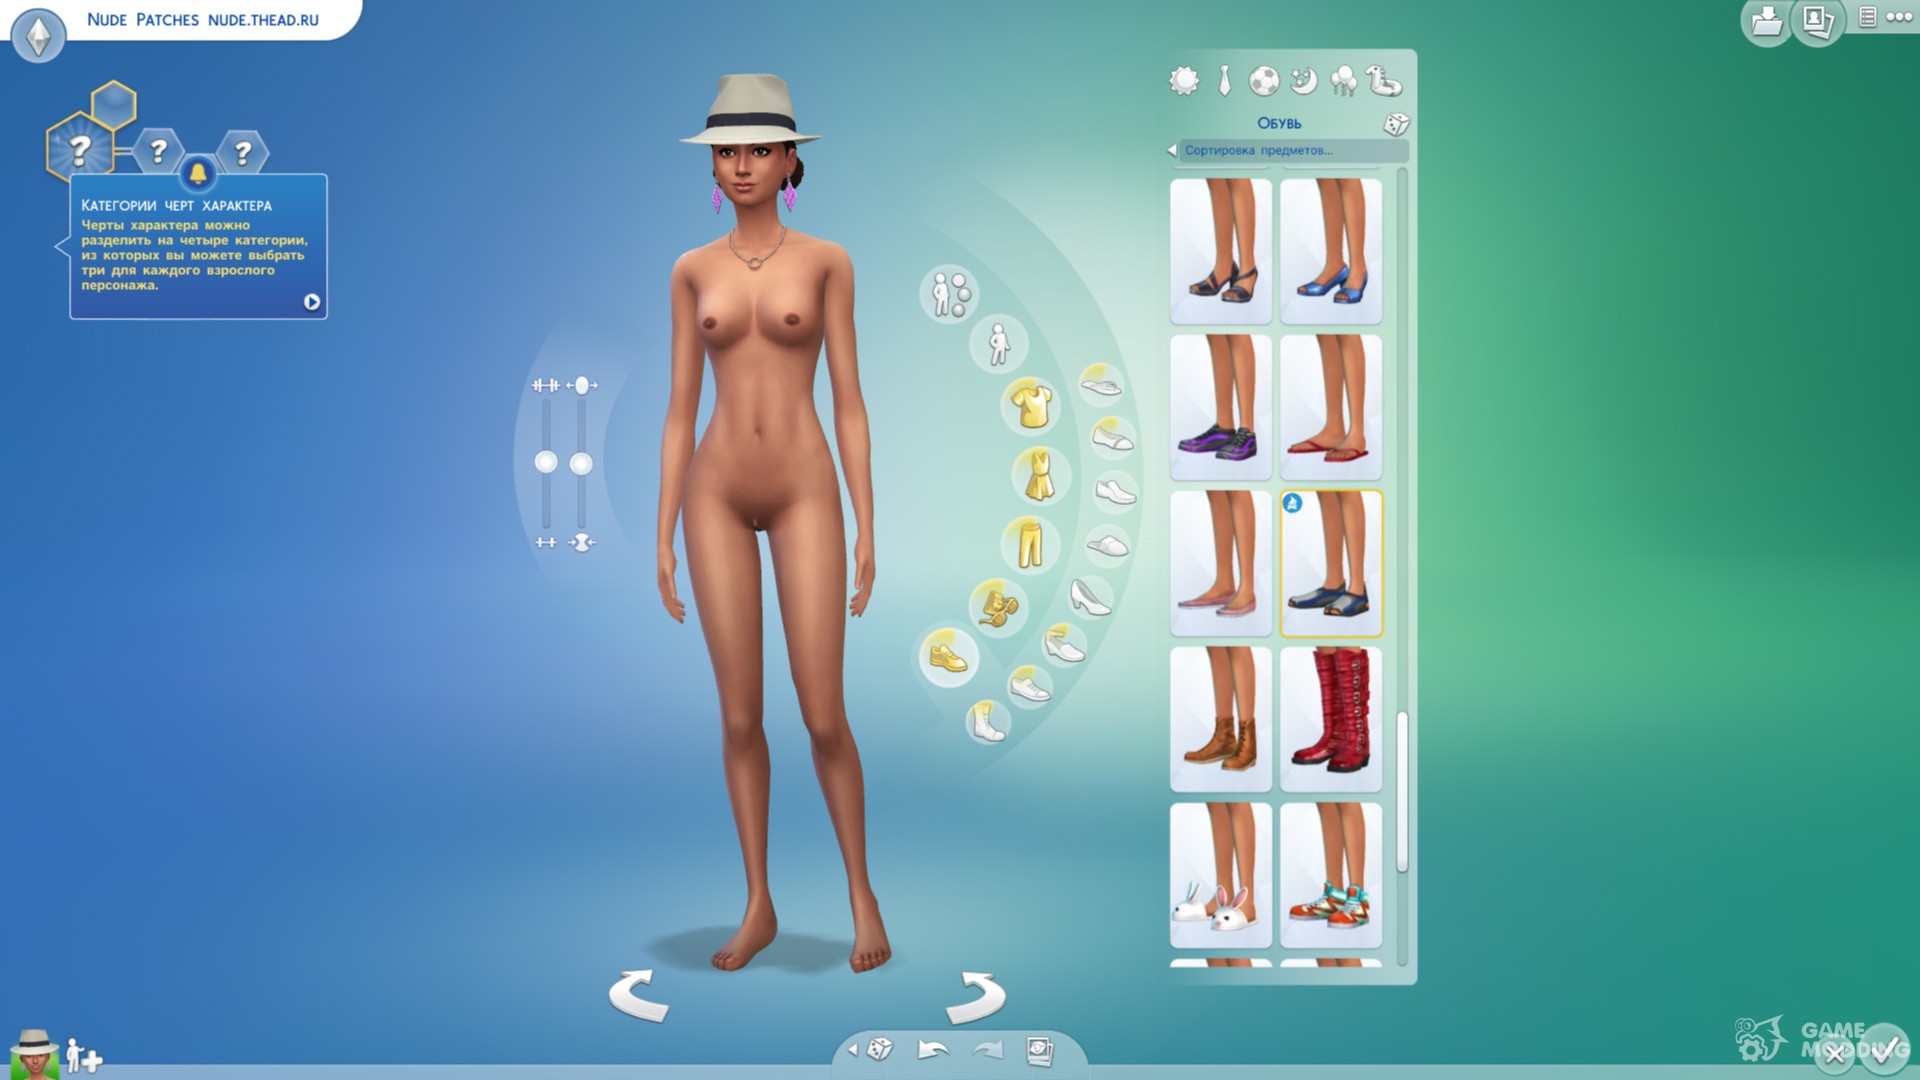 daniel kearns recommends Sims 4 Cc Nude